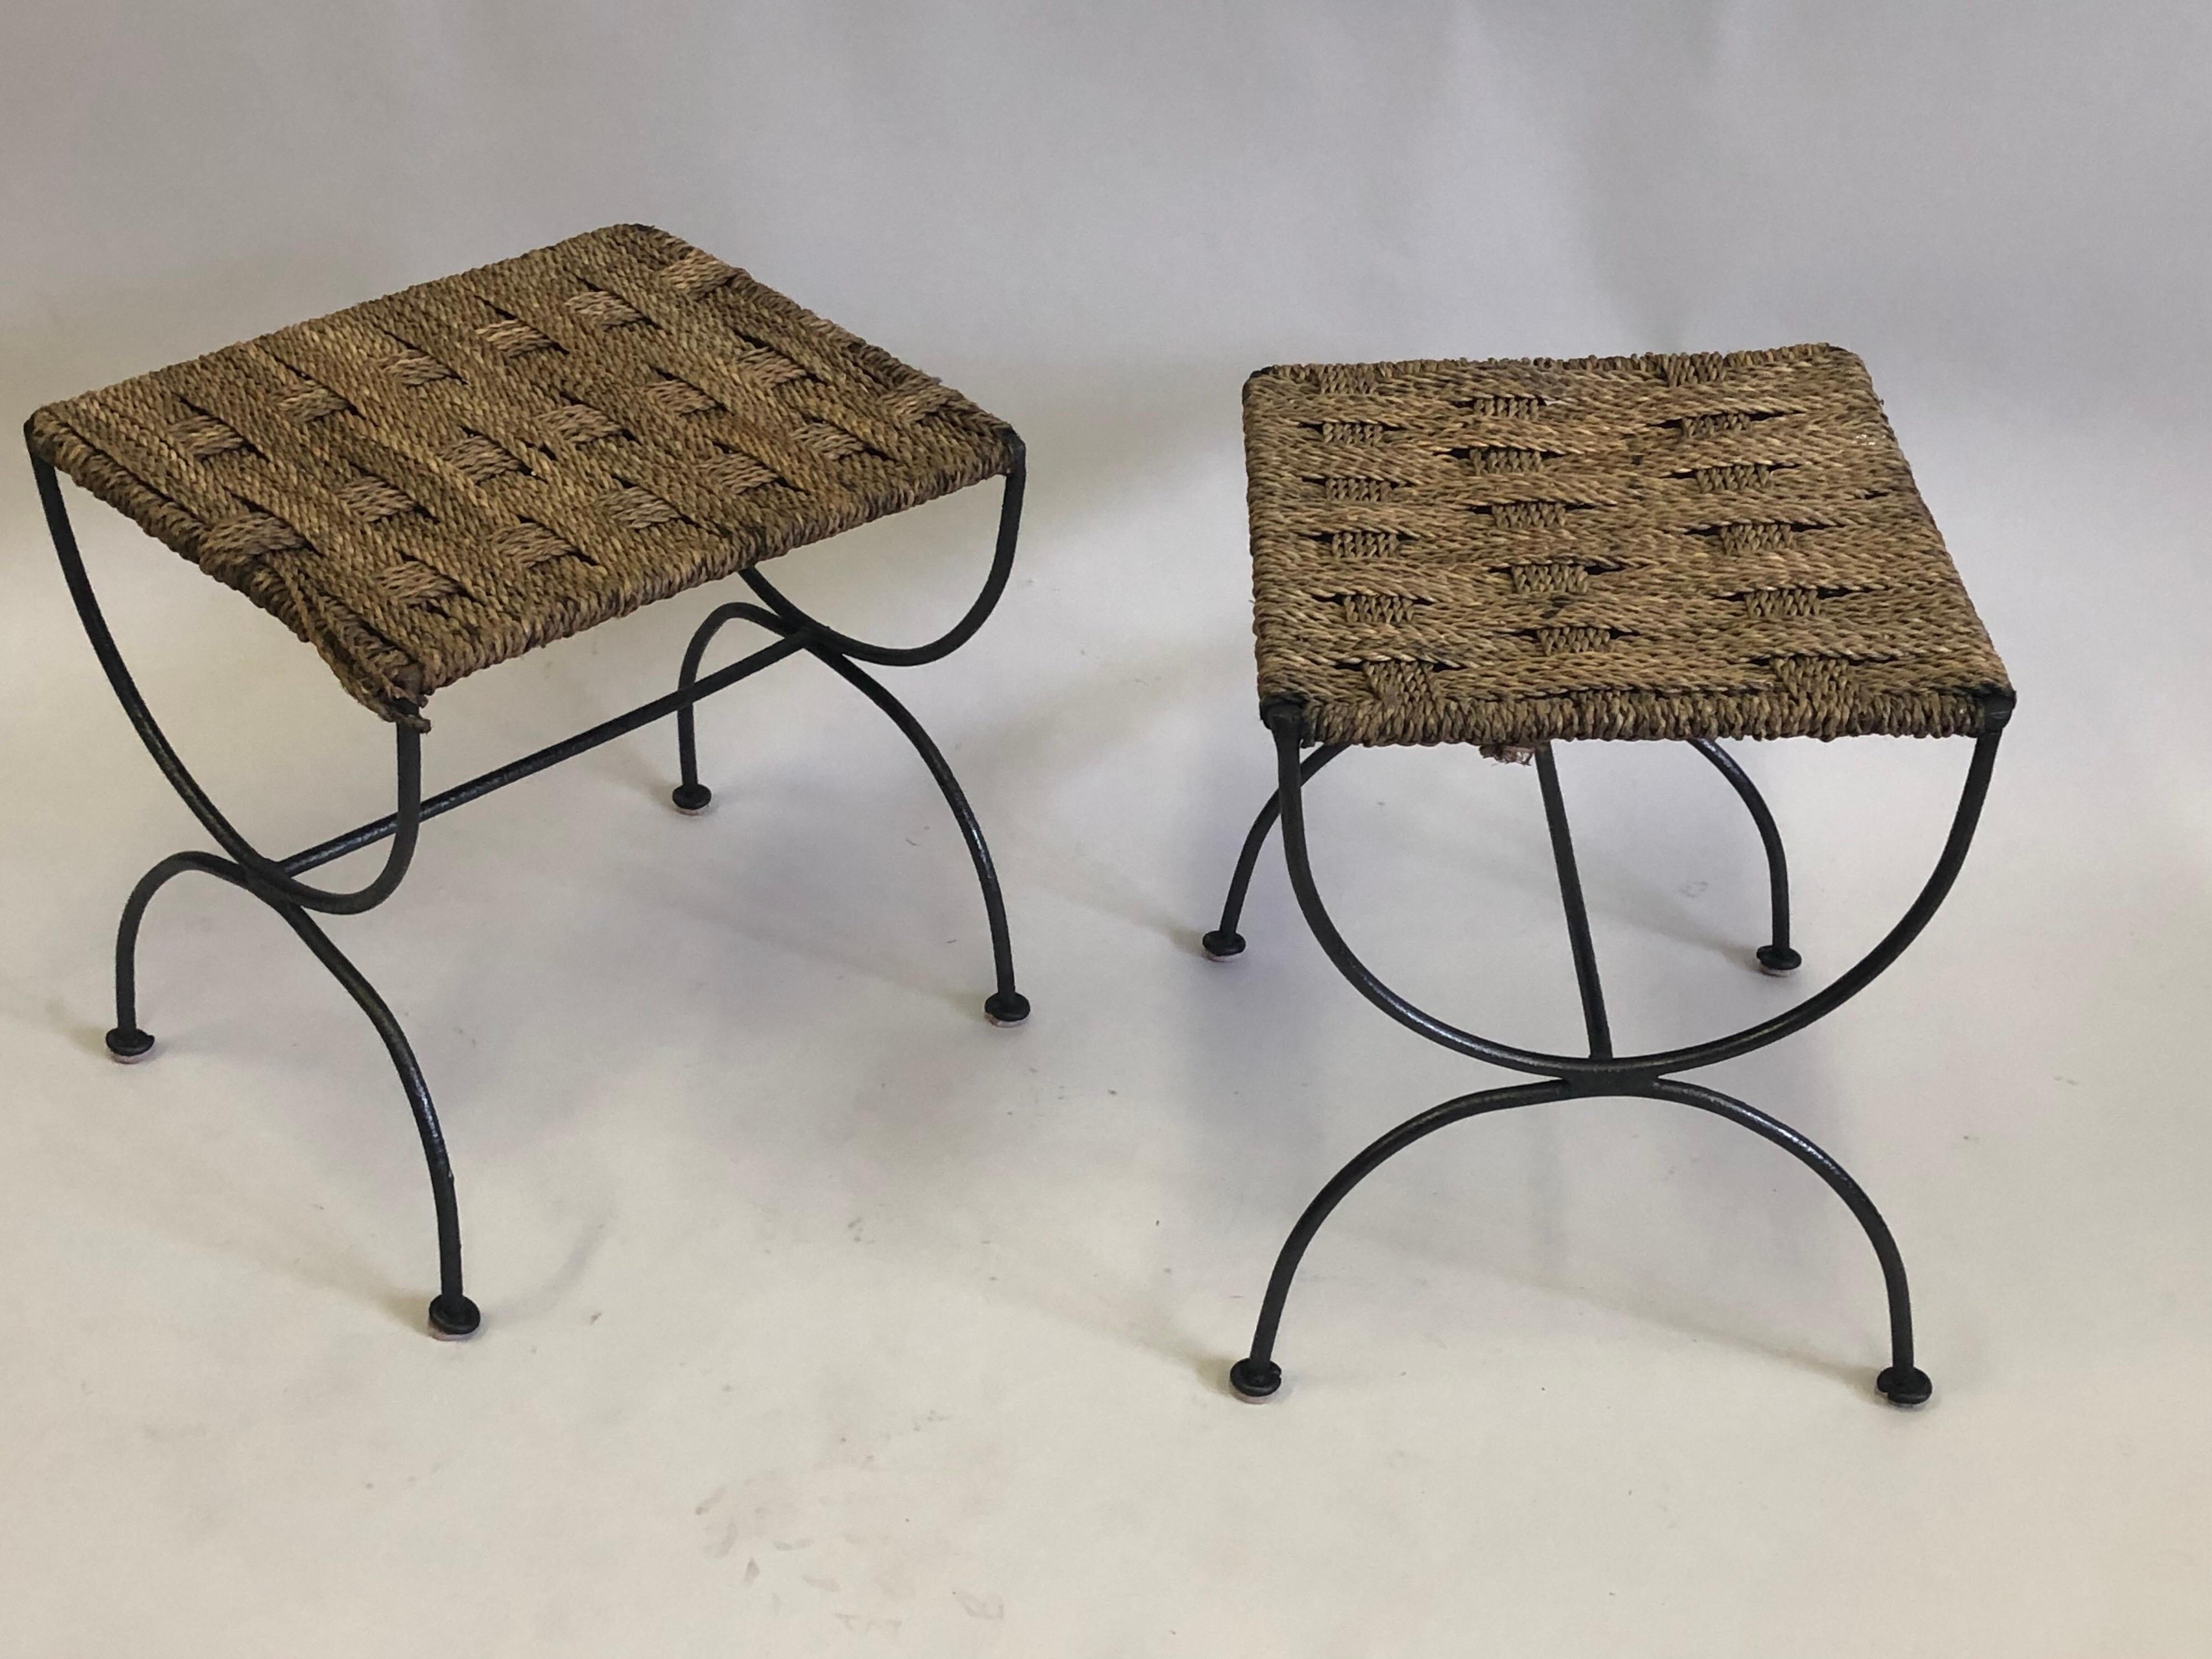 2 Rare pairs of French Mid-Century Modern Neoclassical style stools or benches in hand wrought iron with handmade rope seats circa 1937-1940, attributed to Adrien Audoux and Frida Minet. The wrought iron form is pure and the materials possess warmth